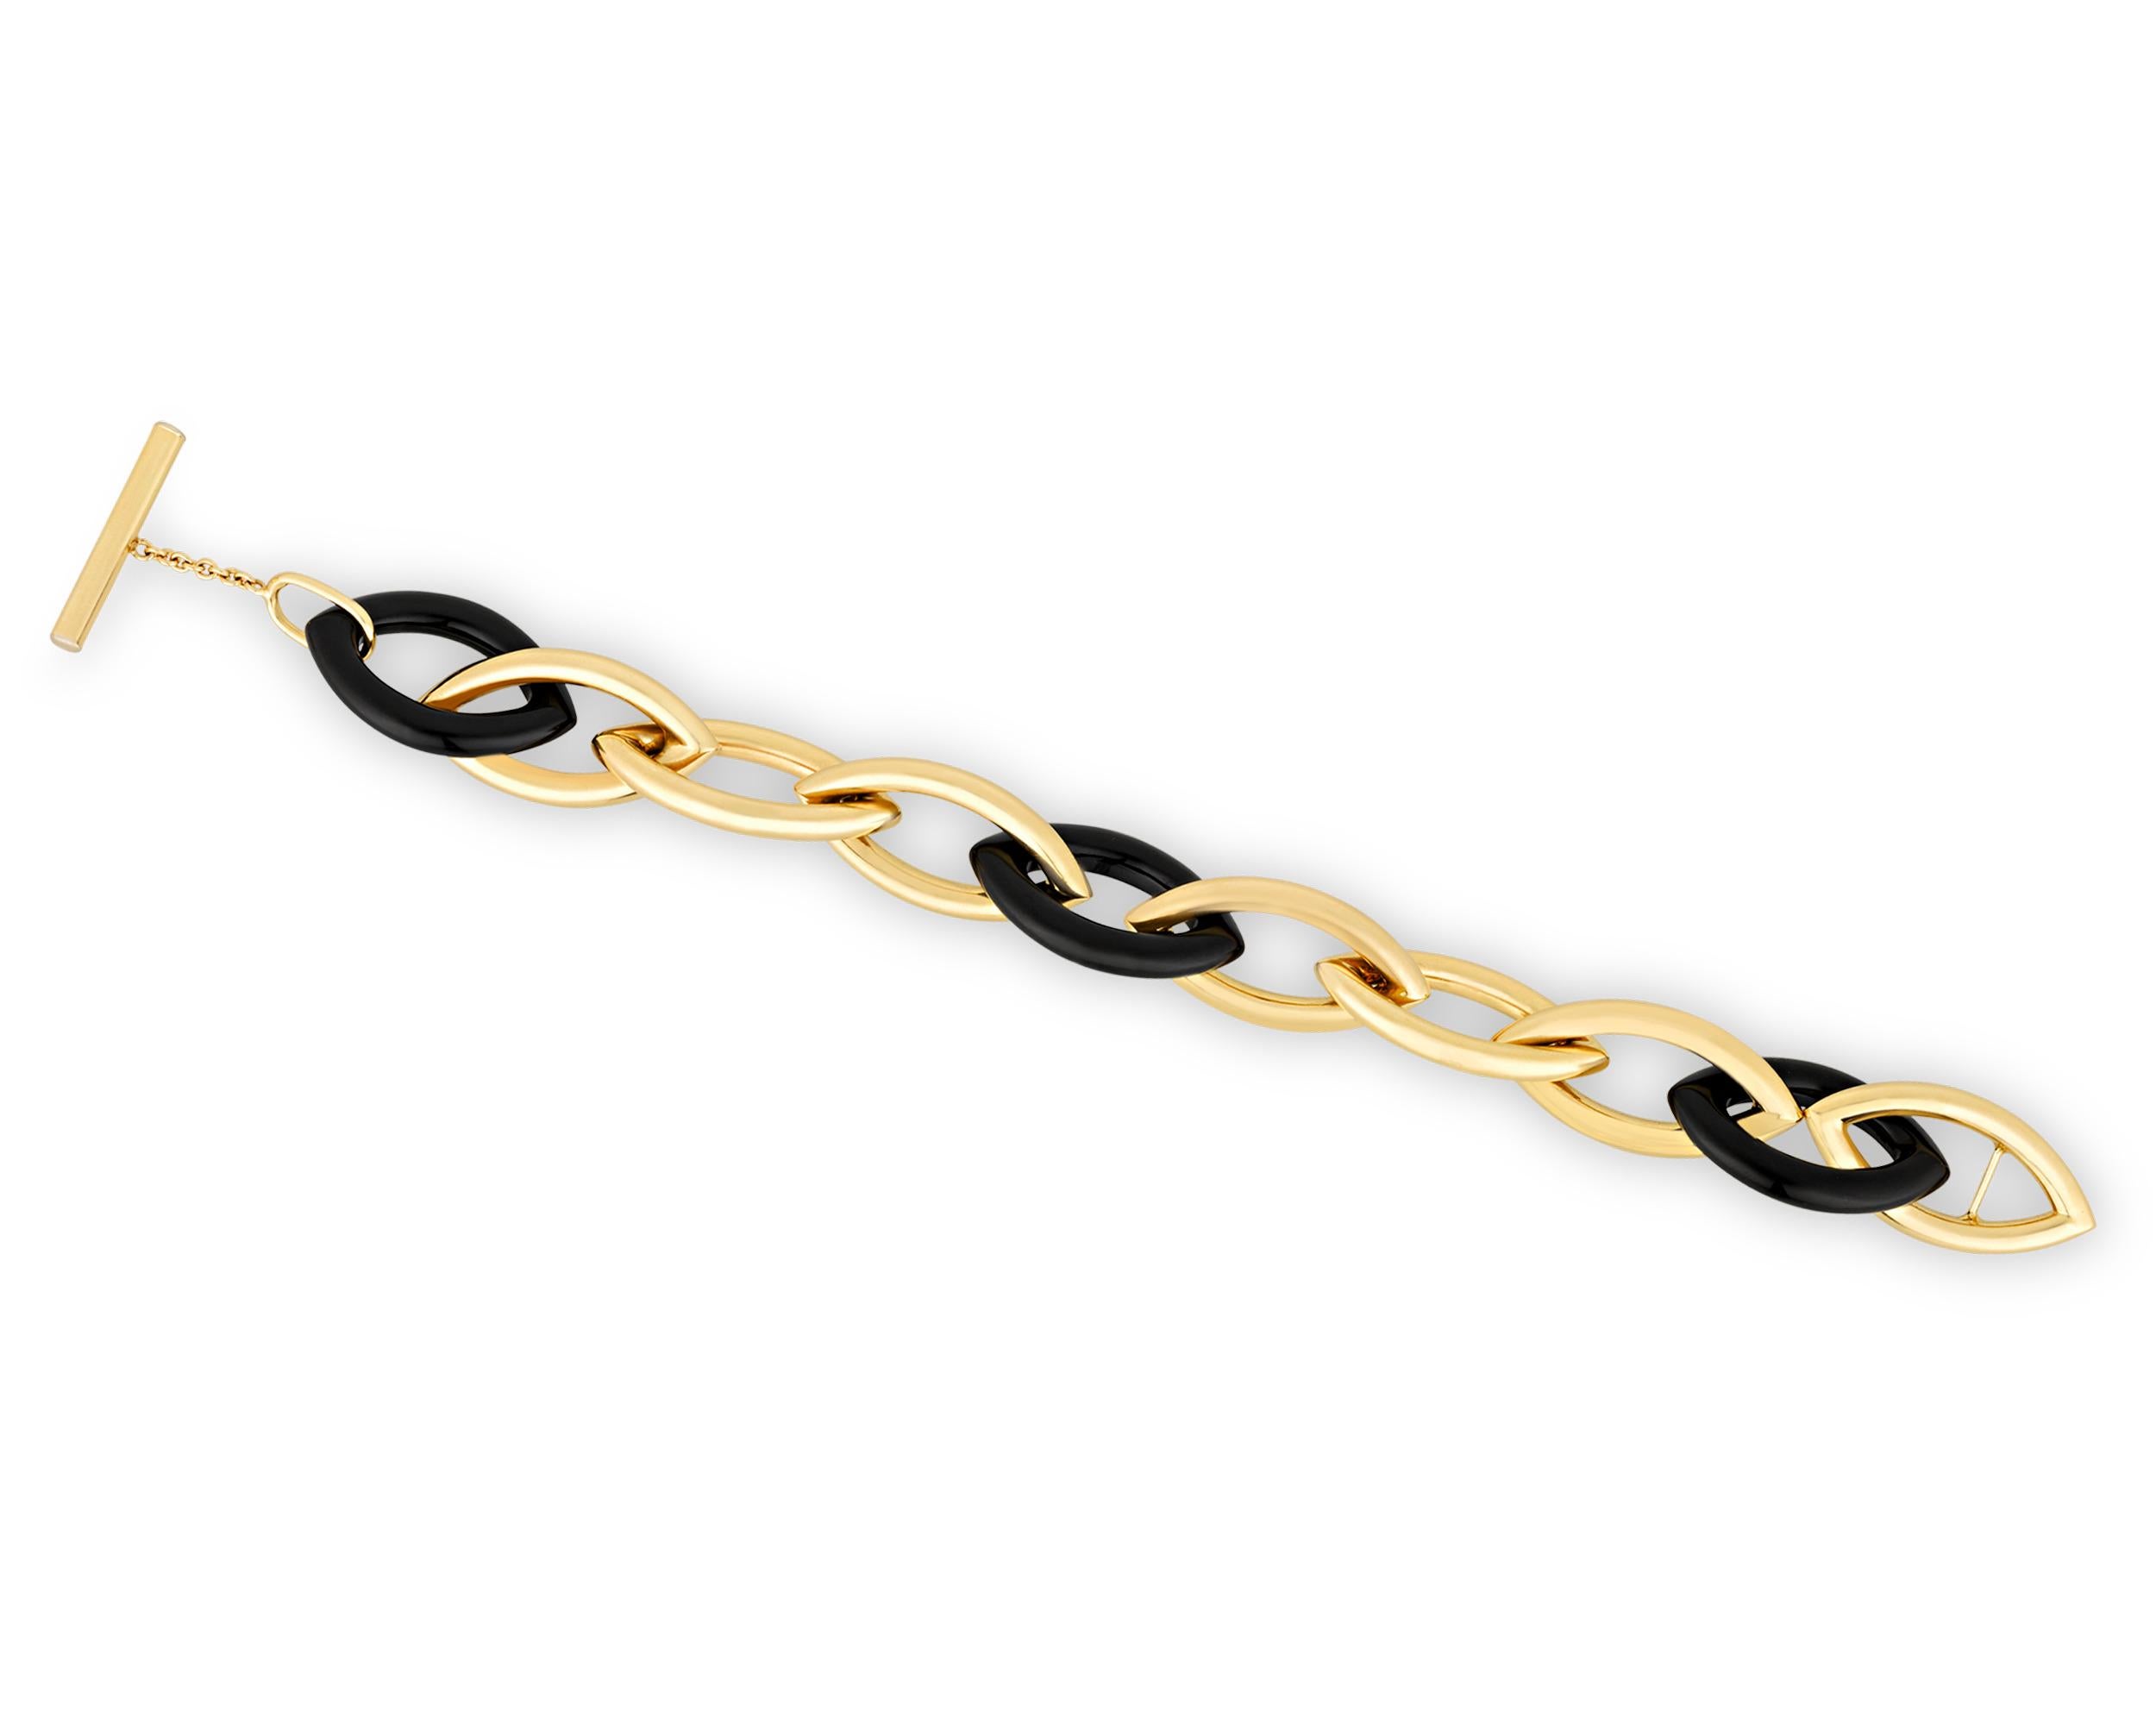 This sophisticated retro bracelet is composed of seven navette-shaped polished gold links, interspersed by three navette-shaped onyx links, forming an enticing visual contrast. Joined with a bar clasp, the bracelet is mounted in 18K yellow